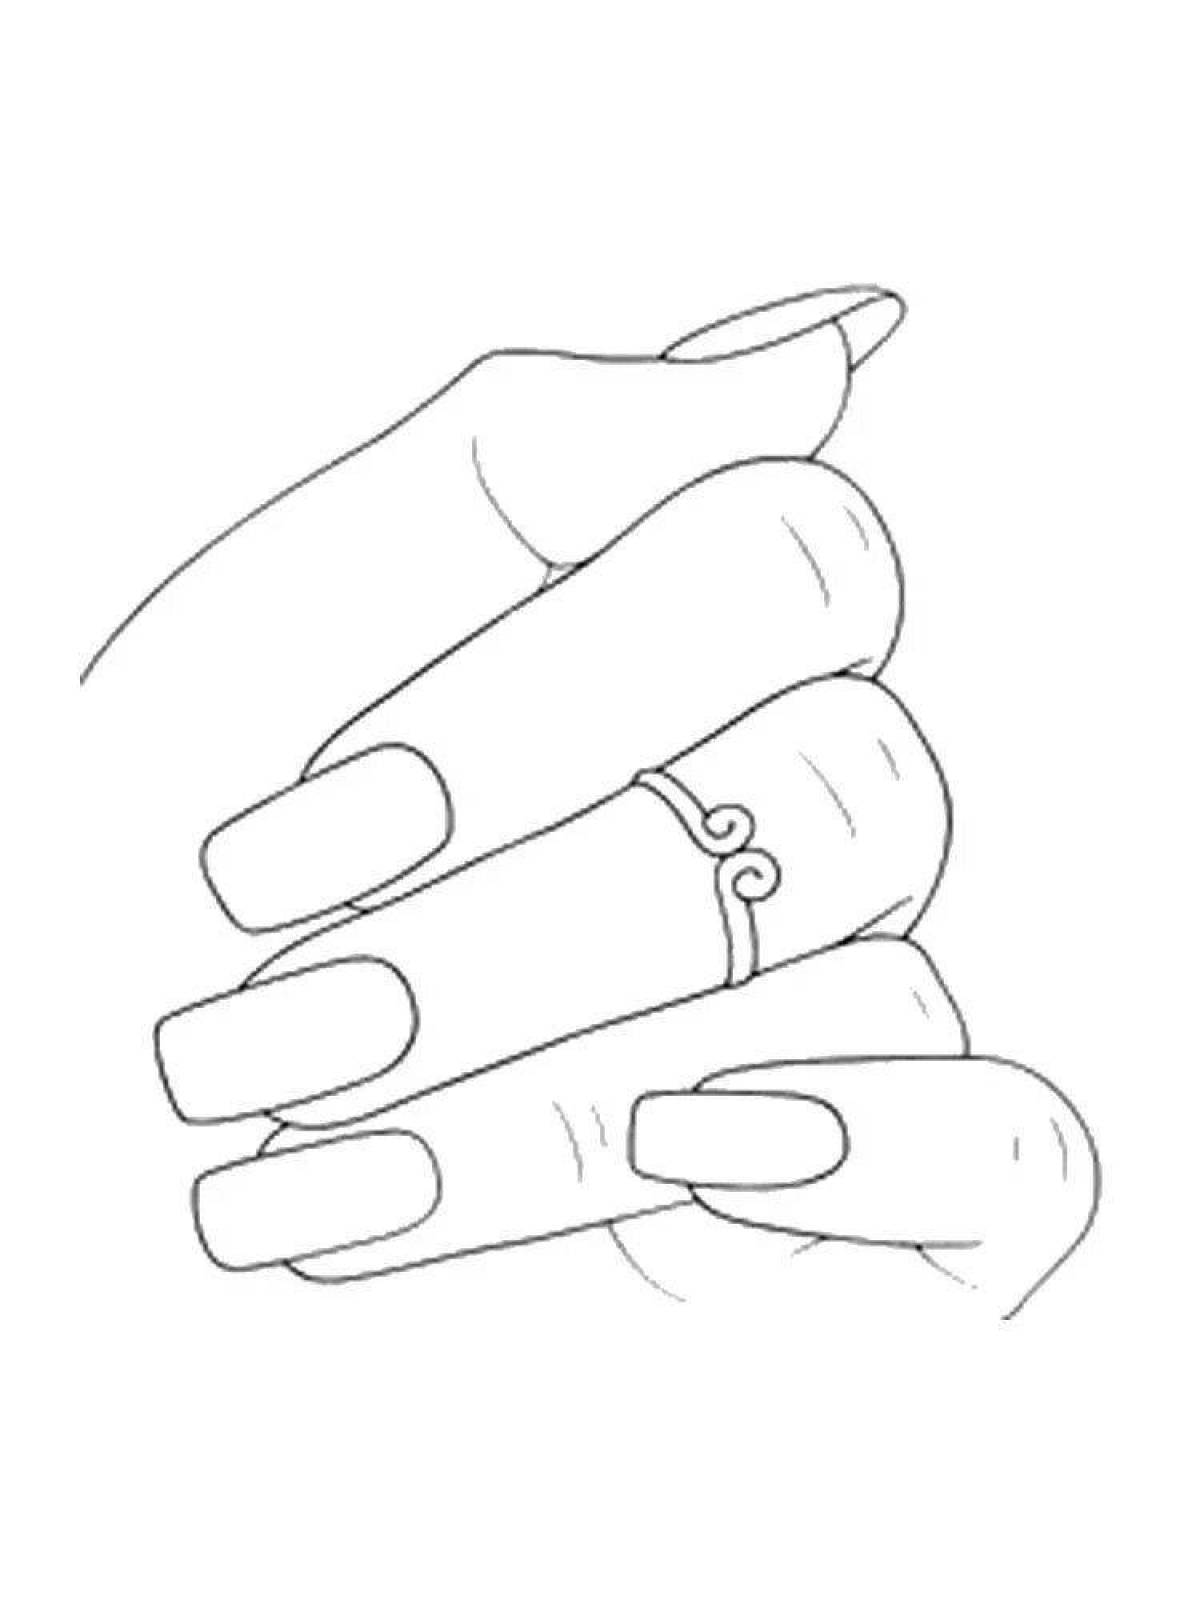 Adorable manicure coloring book for girls